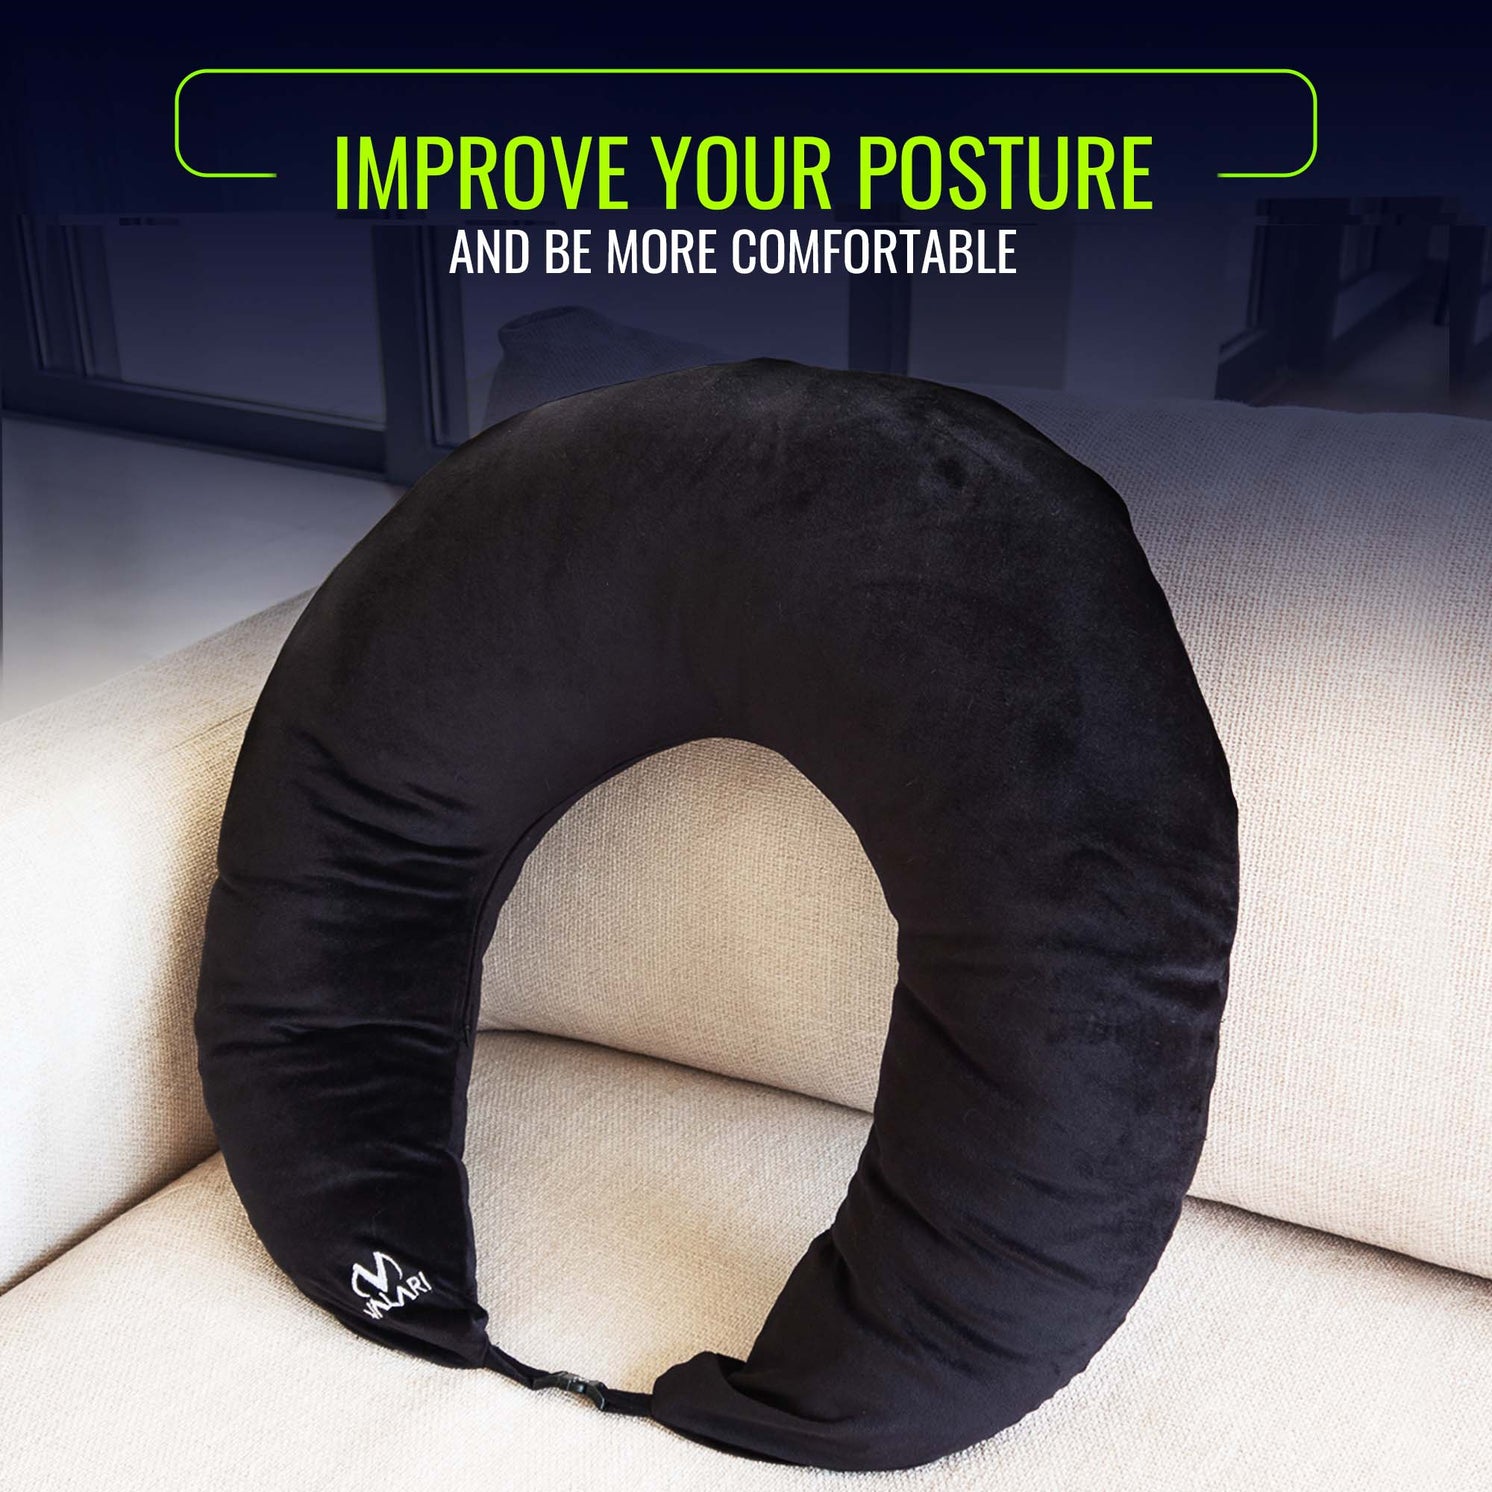 Ergonomic Gaming Chair with U-Shaped Neck Pillow and Back Support Pillow 